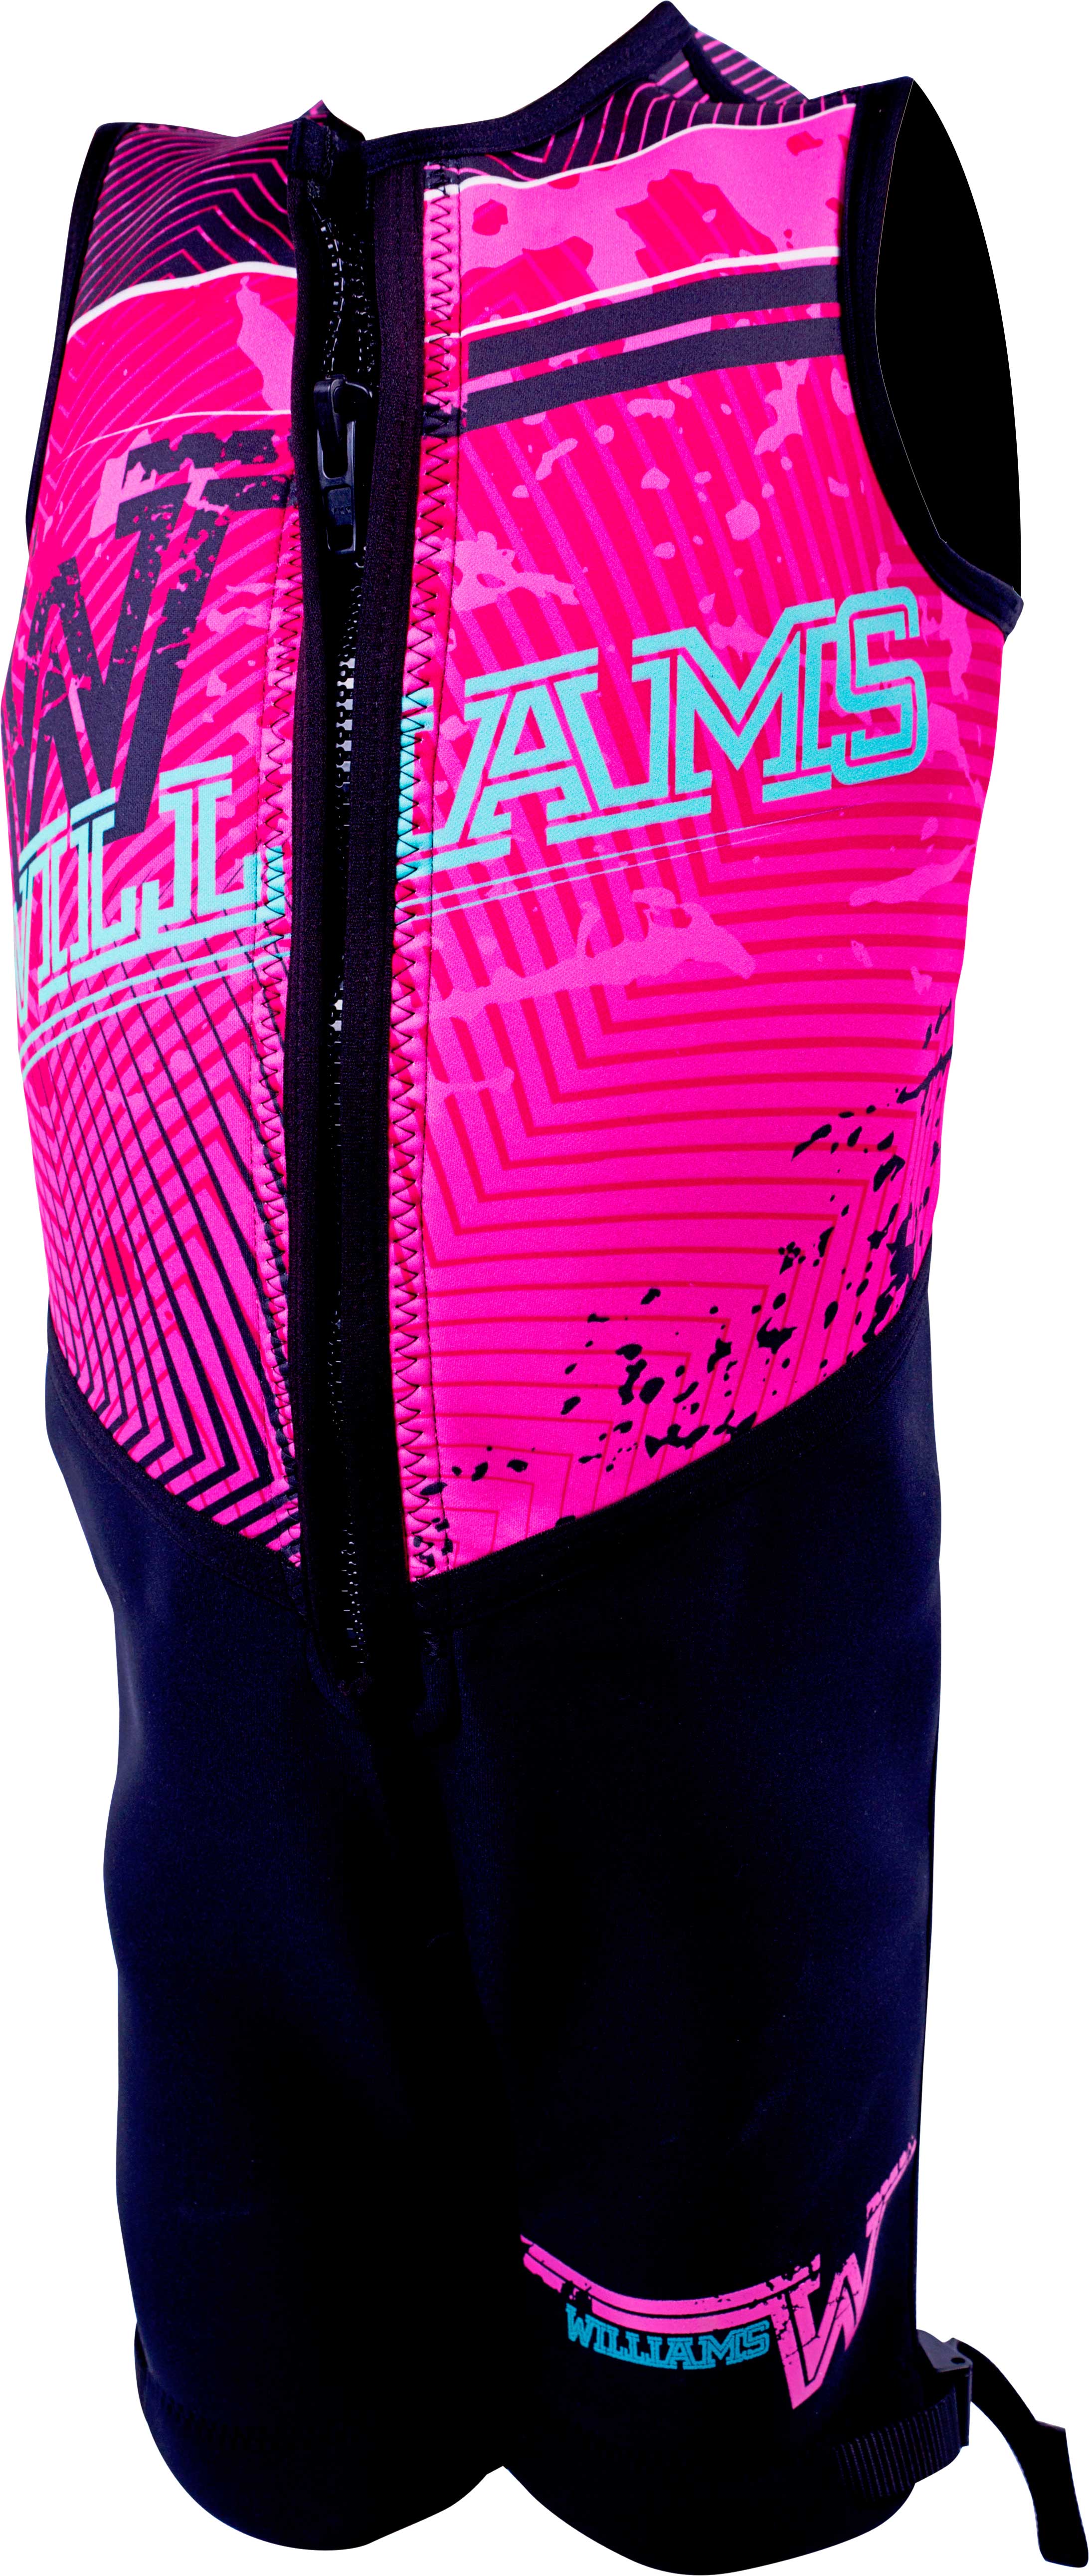 WILLIAMS YOUTH URBAN SPORTS BUOYANCY SUIT - PINK - 16